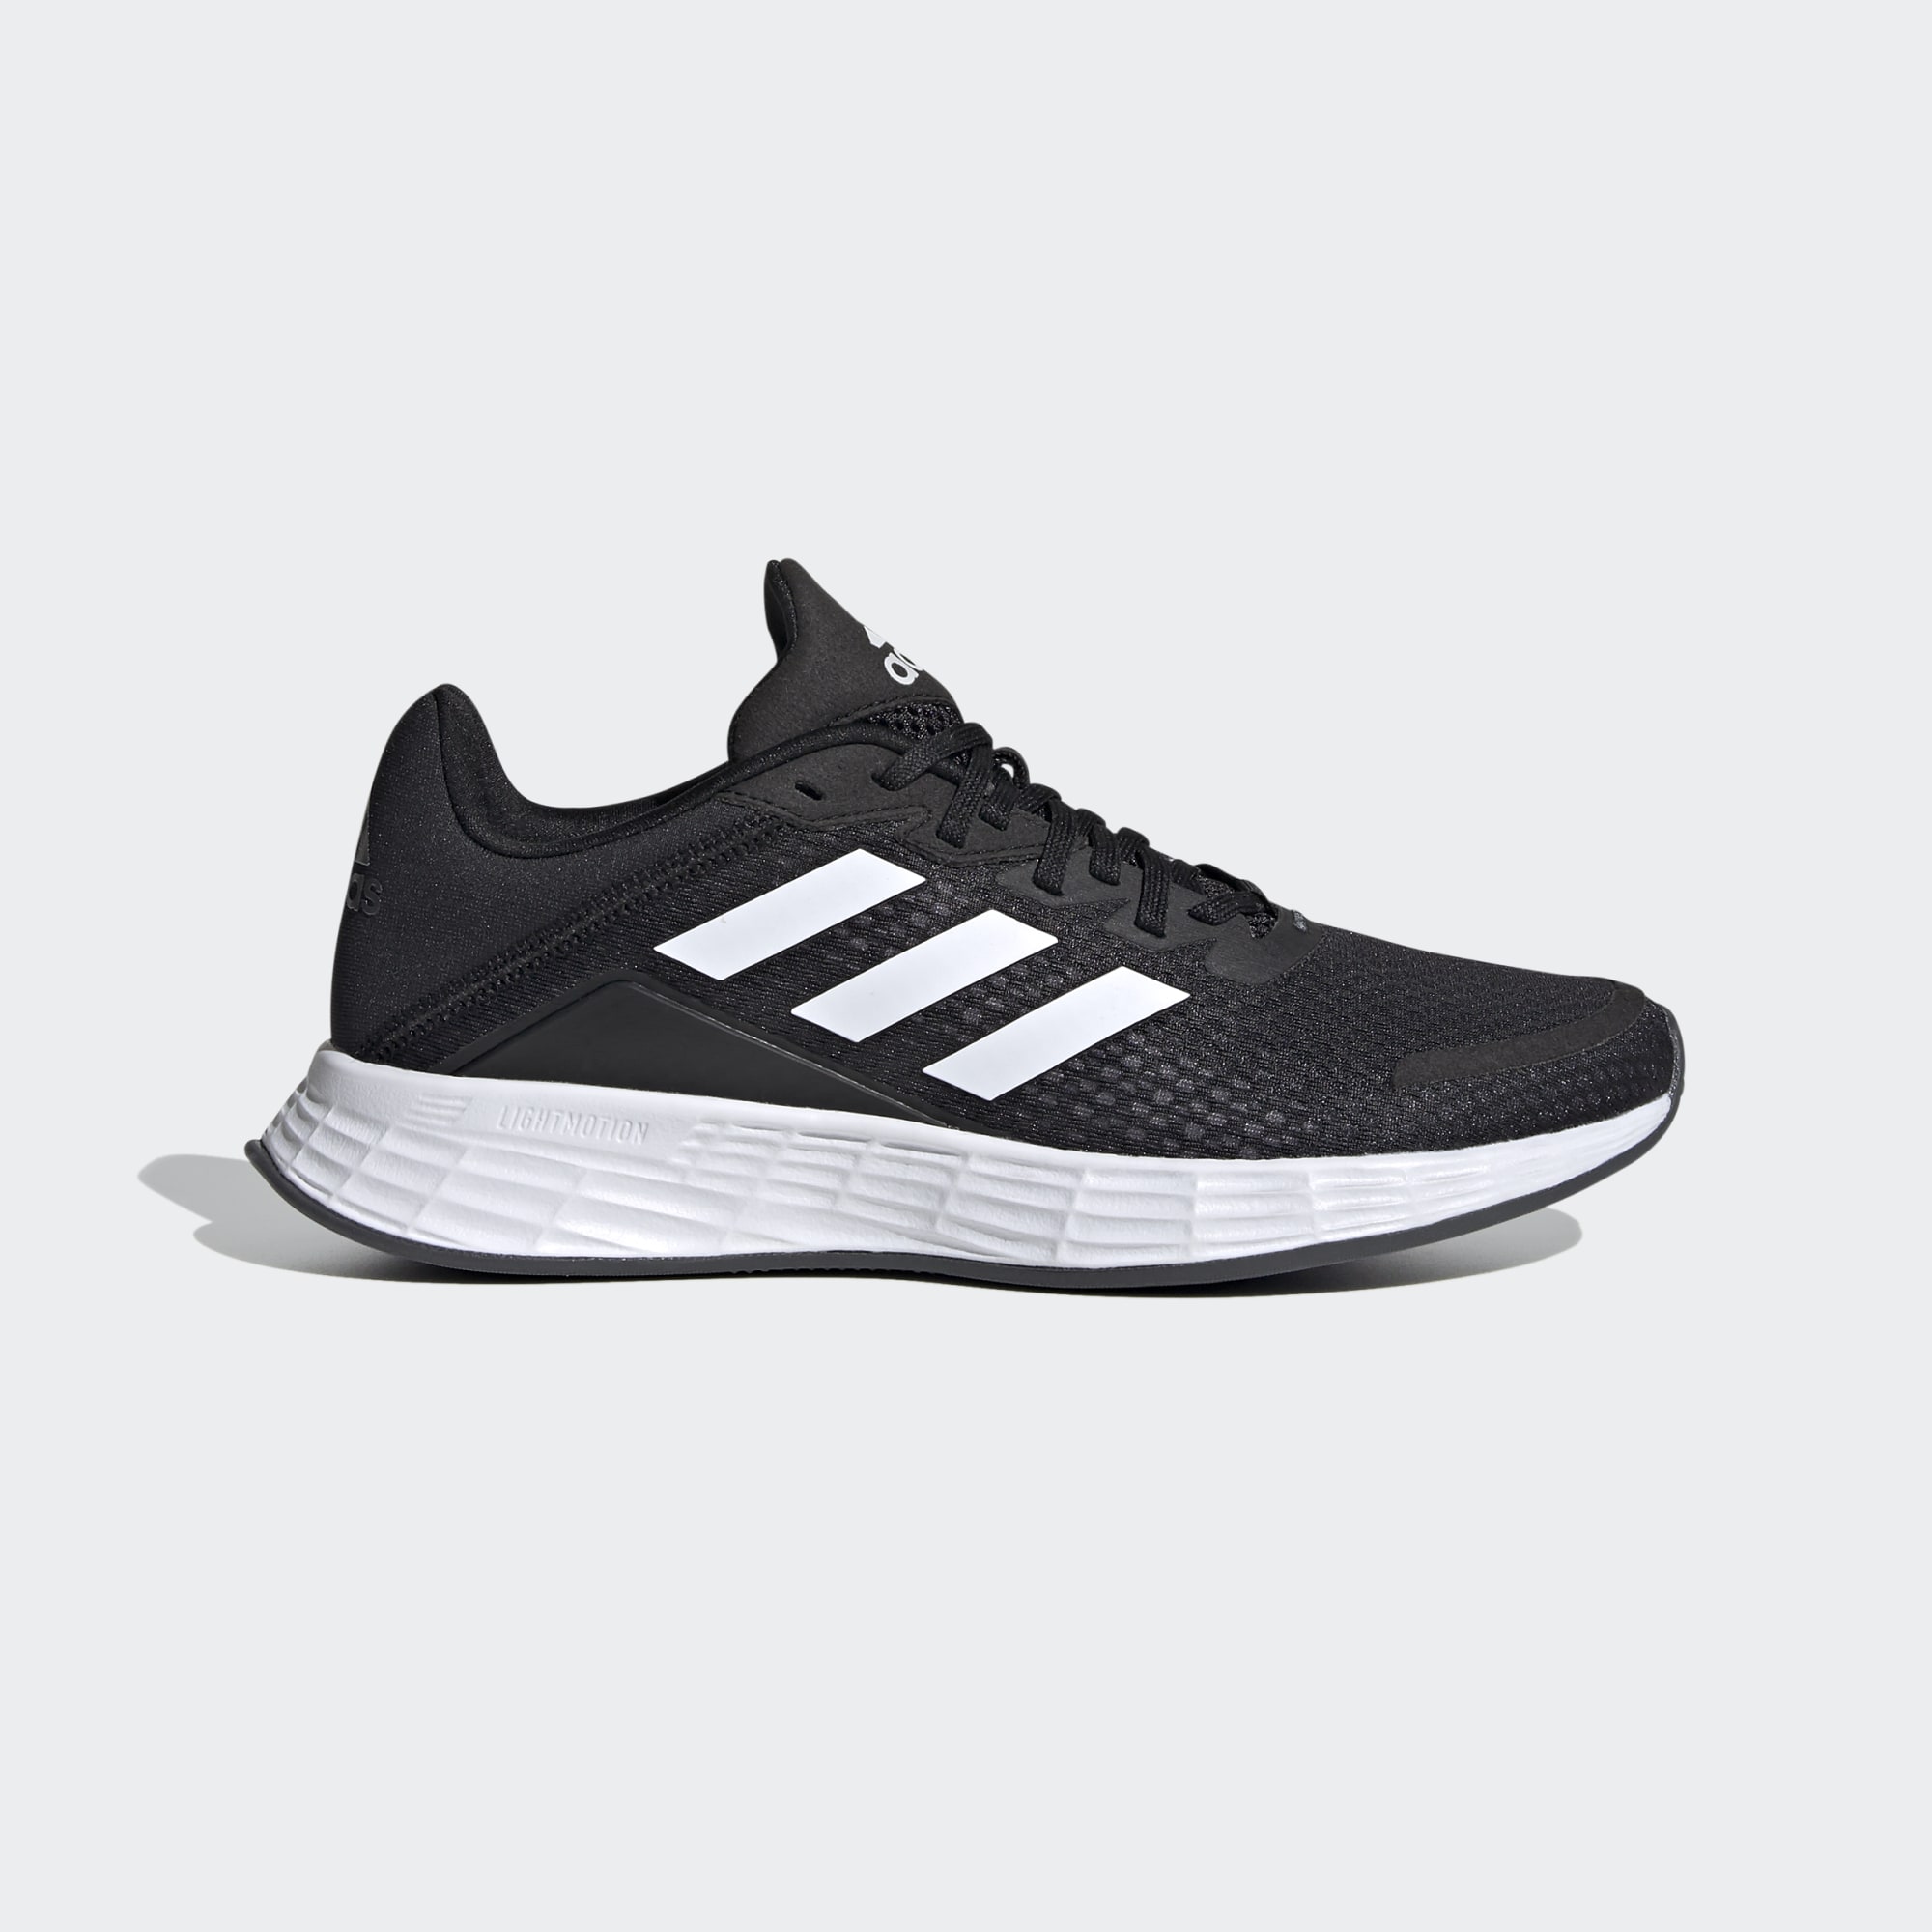 Adidas' Major End of Year Sale Has Sneakers 40% Off | Well+Good